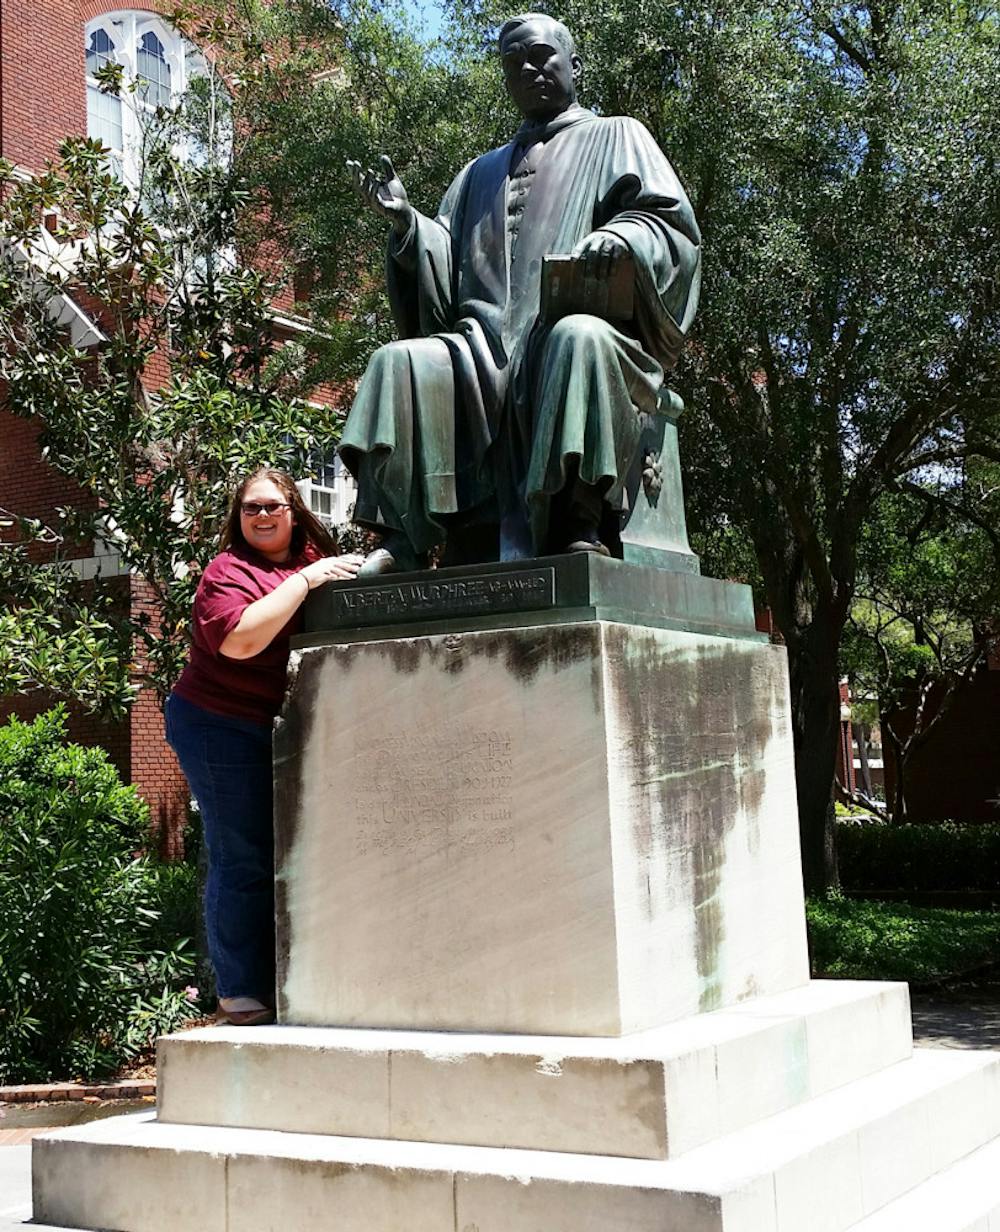 <p class="p1">Madison Todd, a 22-year-old UF political science senior, poses next to the Albert Murphree near Peabody Hall and the Plaza of the Americas.</p>